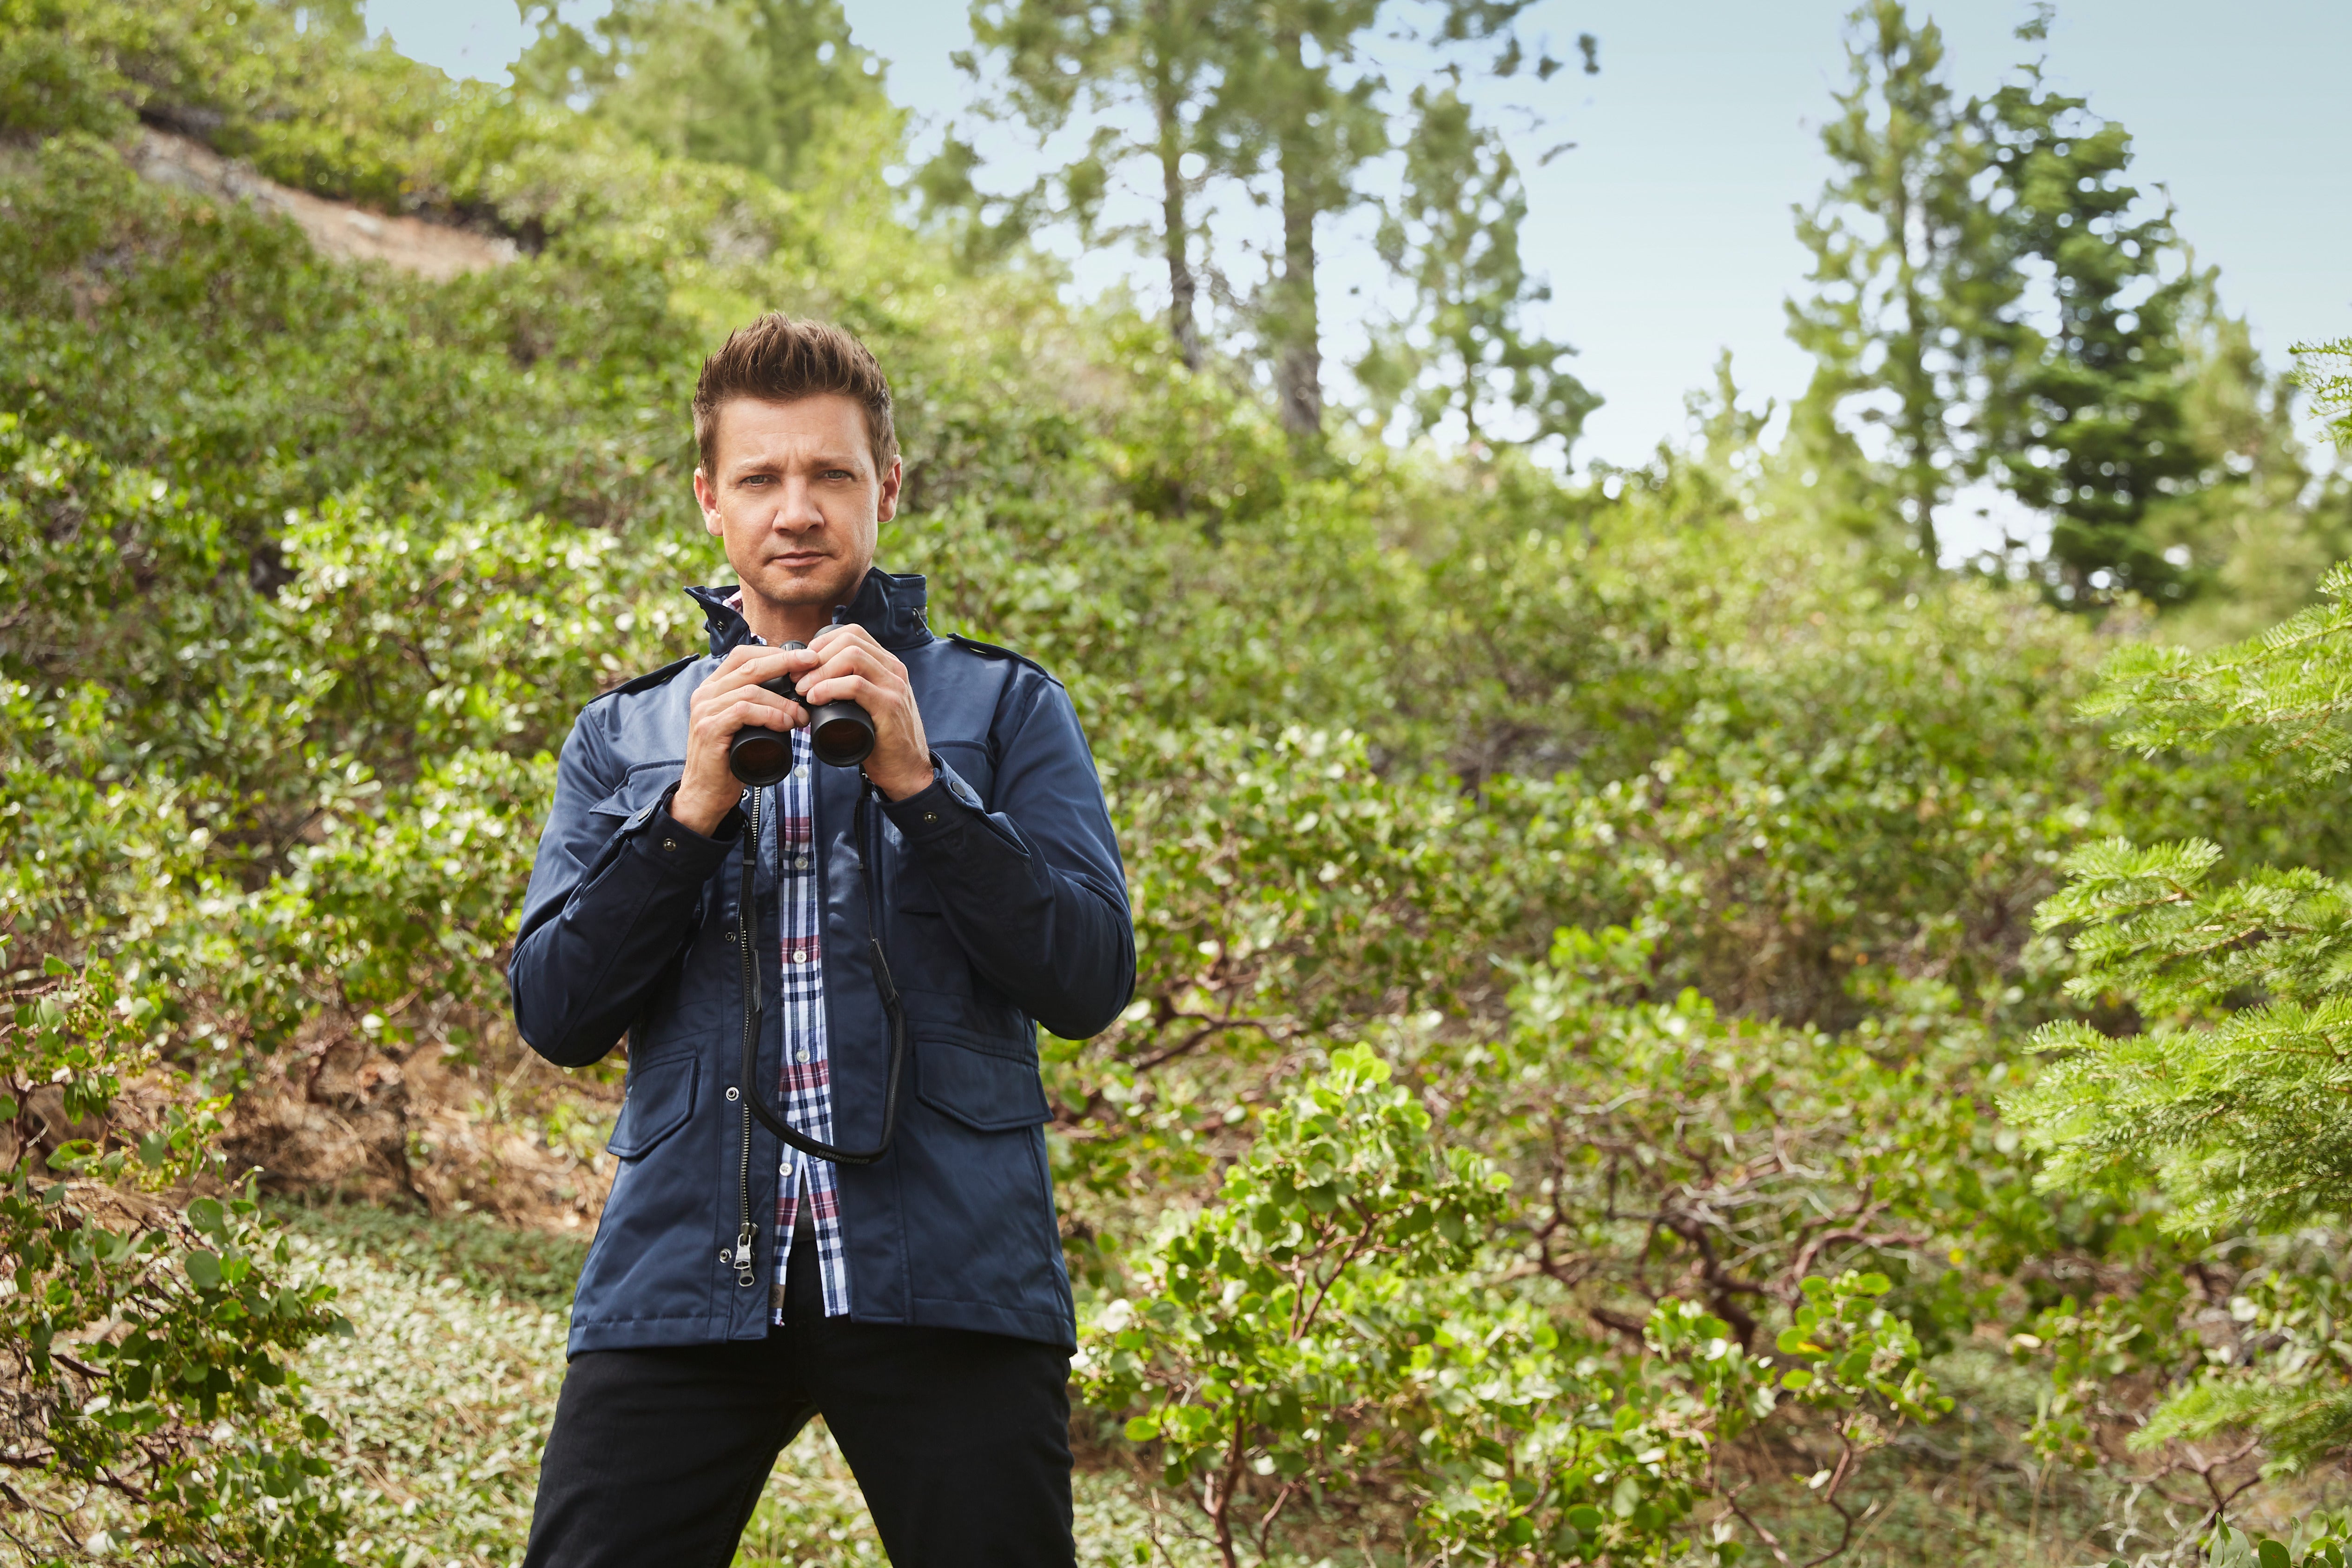 Jeremy Renner stands holding binoculars but again not looking through them.